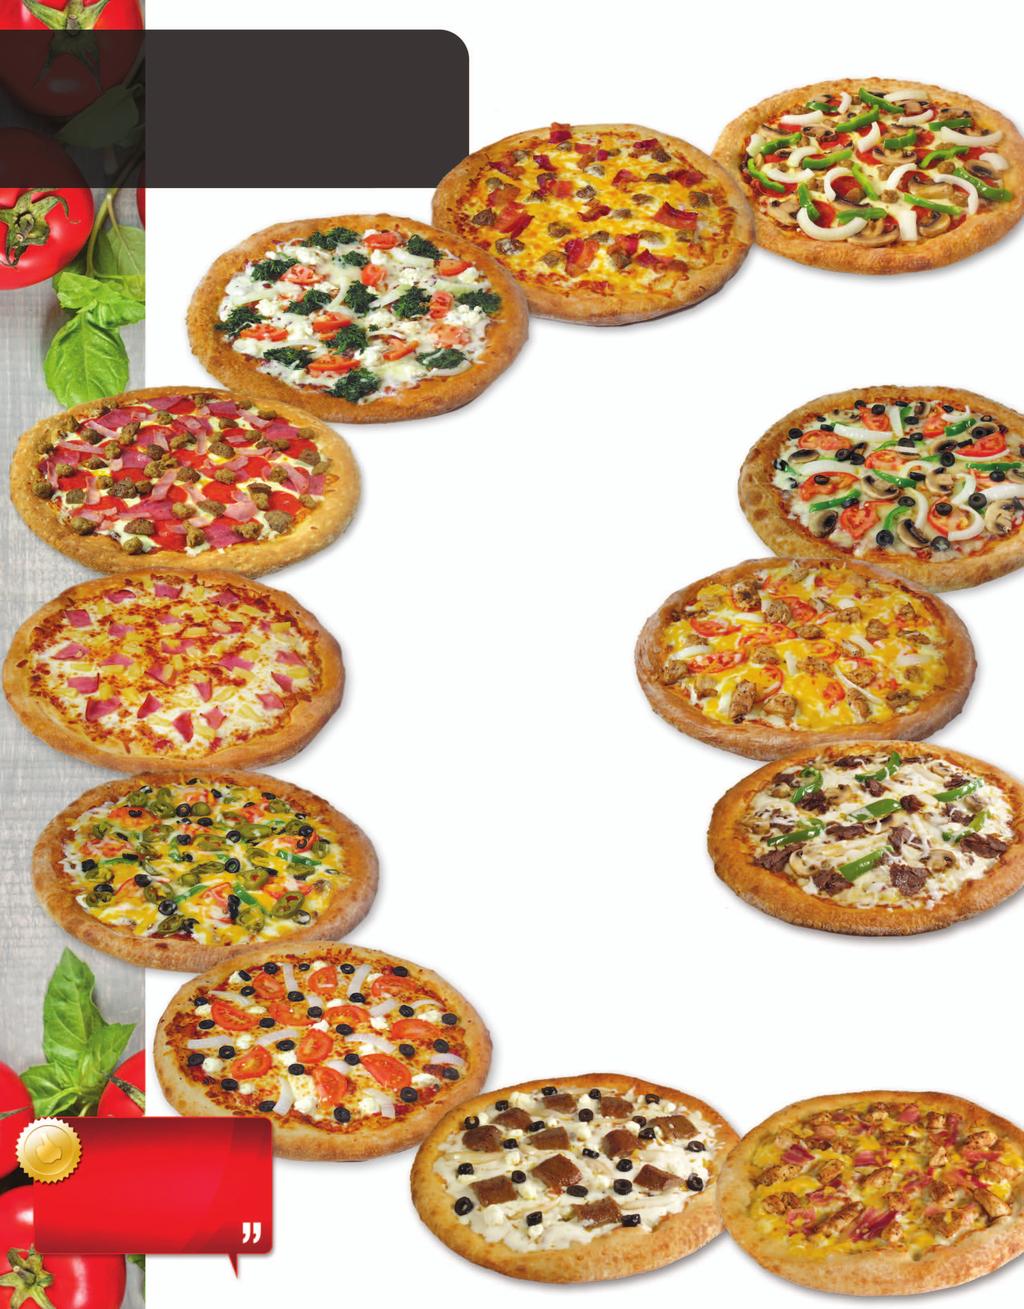 Gourmet Pizza Our Pizzas are prepared with the highest quality ingredients. We use 100% real Mozzarella Cheese, Fresh Basil, Imported Olive Oil and Our Original Pizza Sauce.